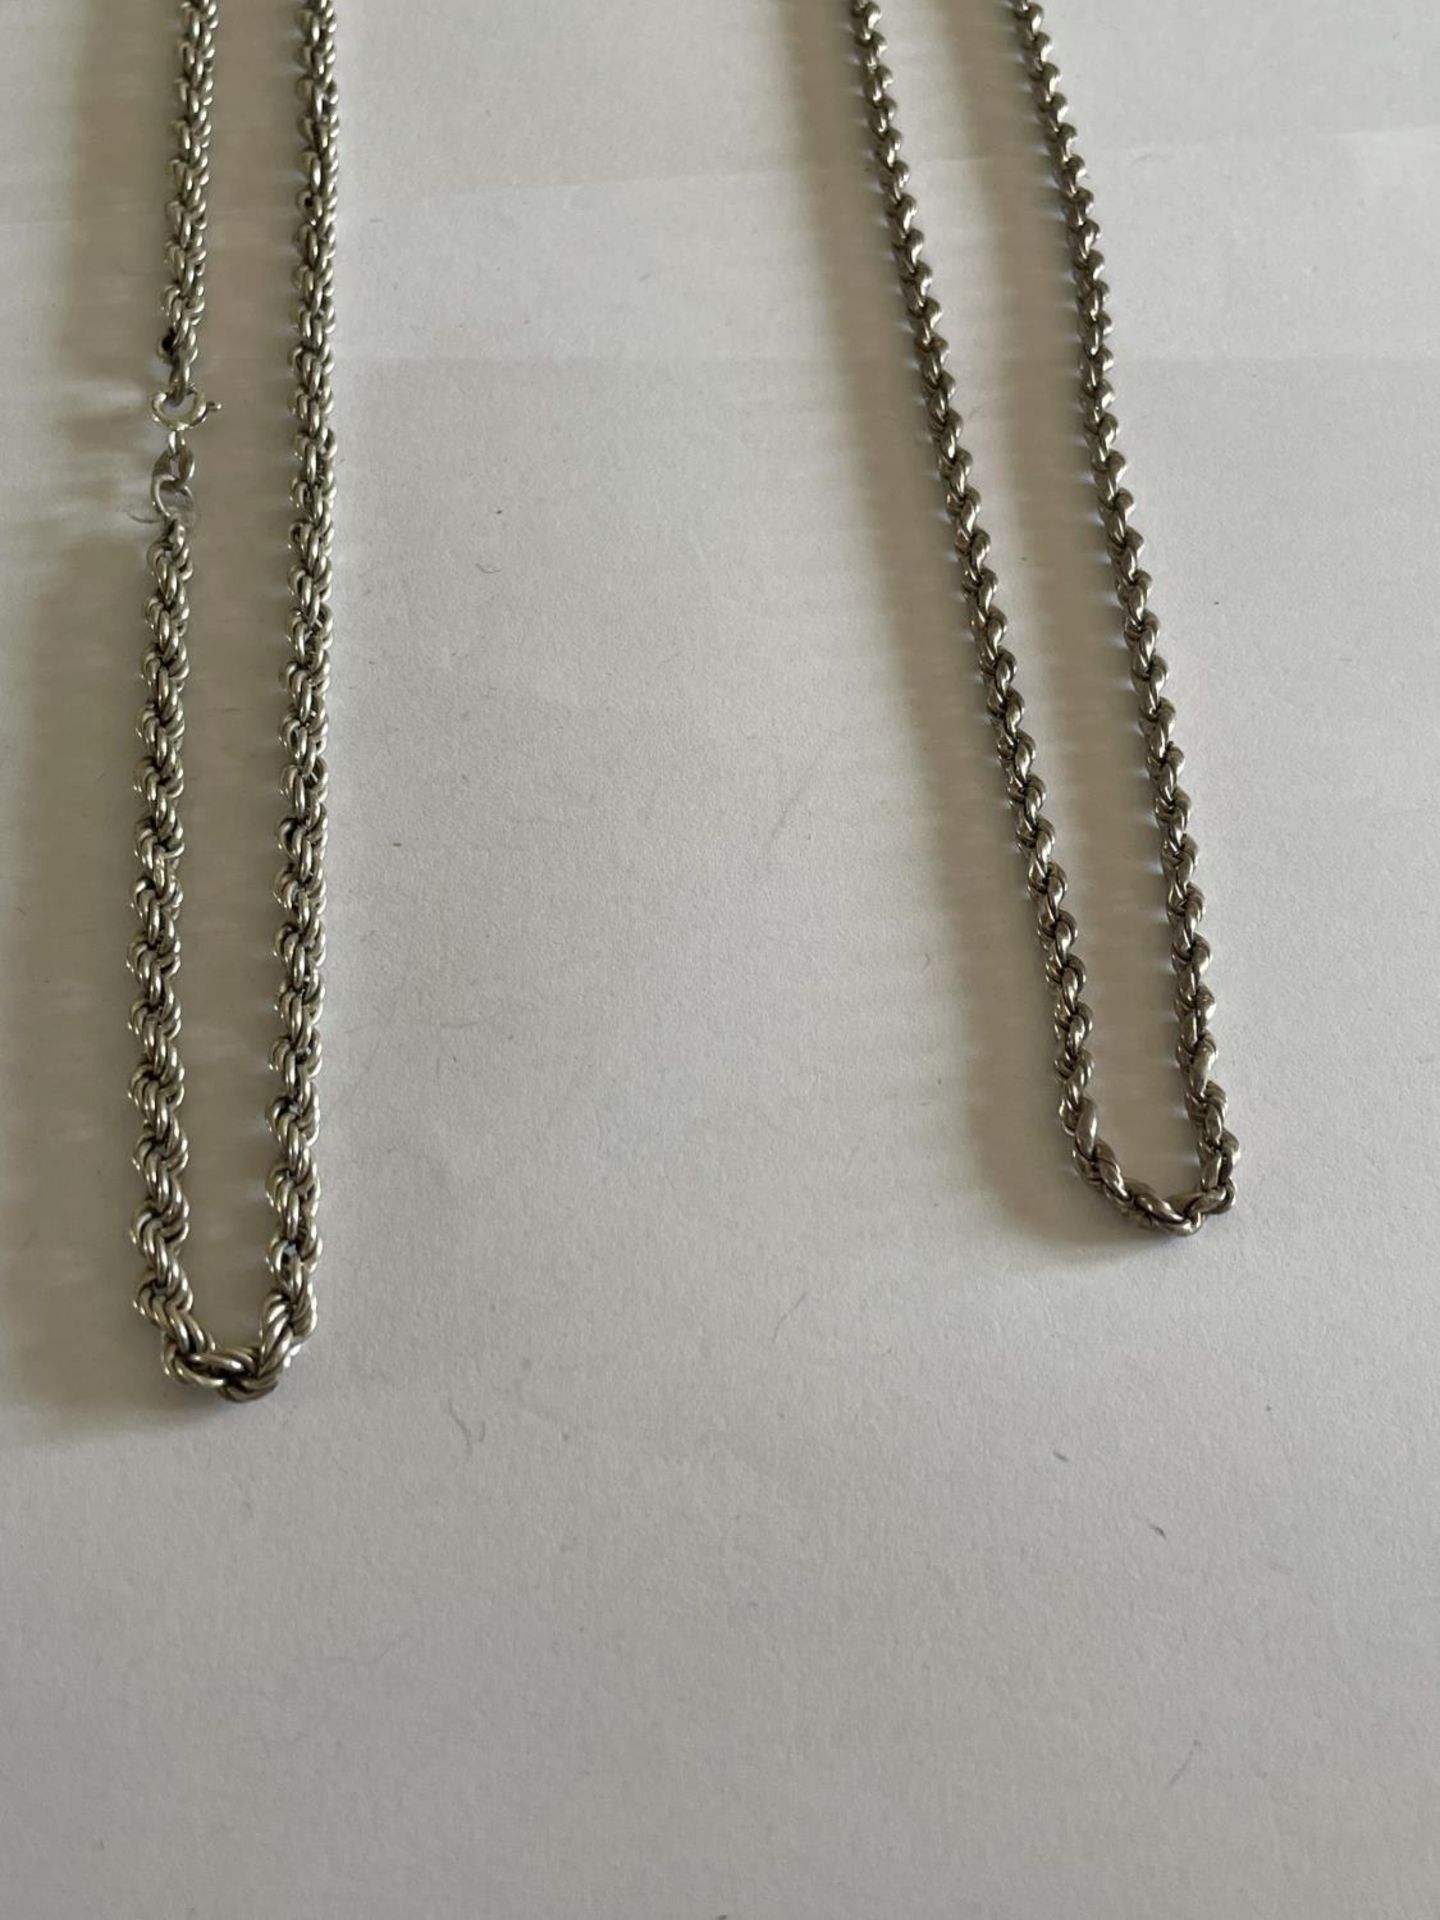 TWO SILVER ROPE NECKLACES LENGTH 18 INCHES - Image 2 of 2